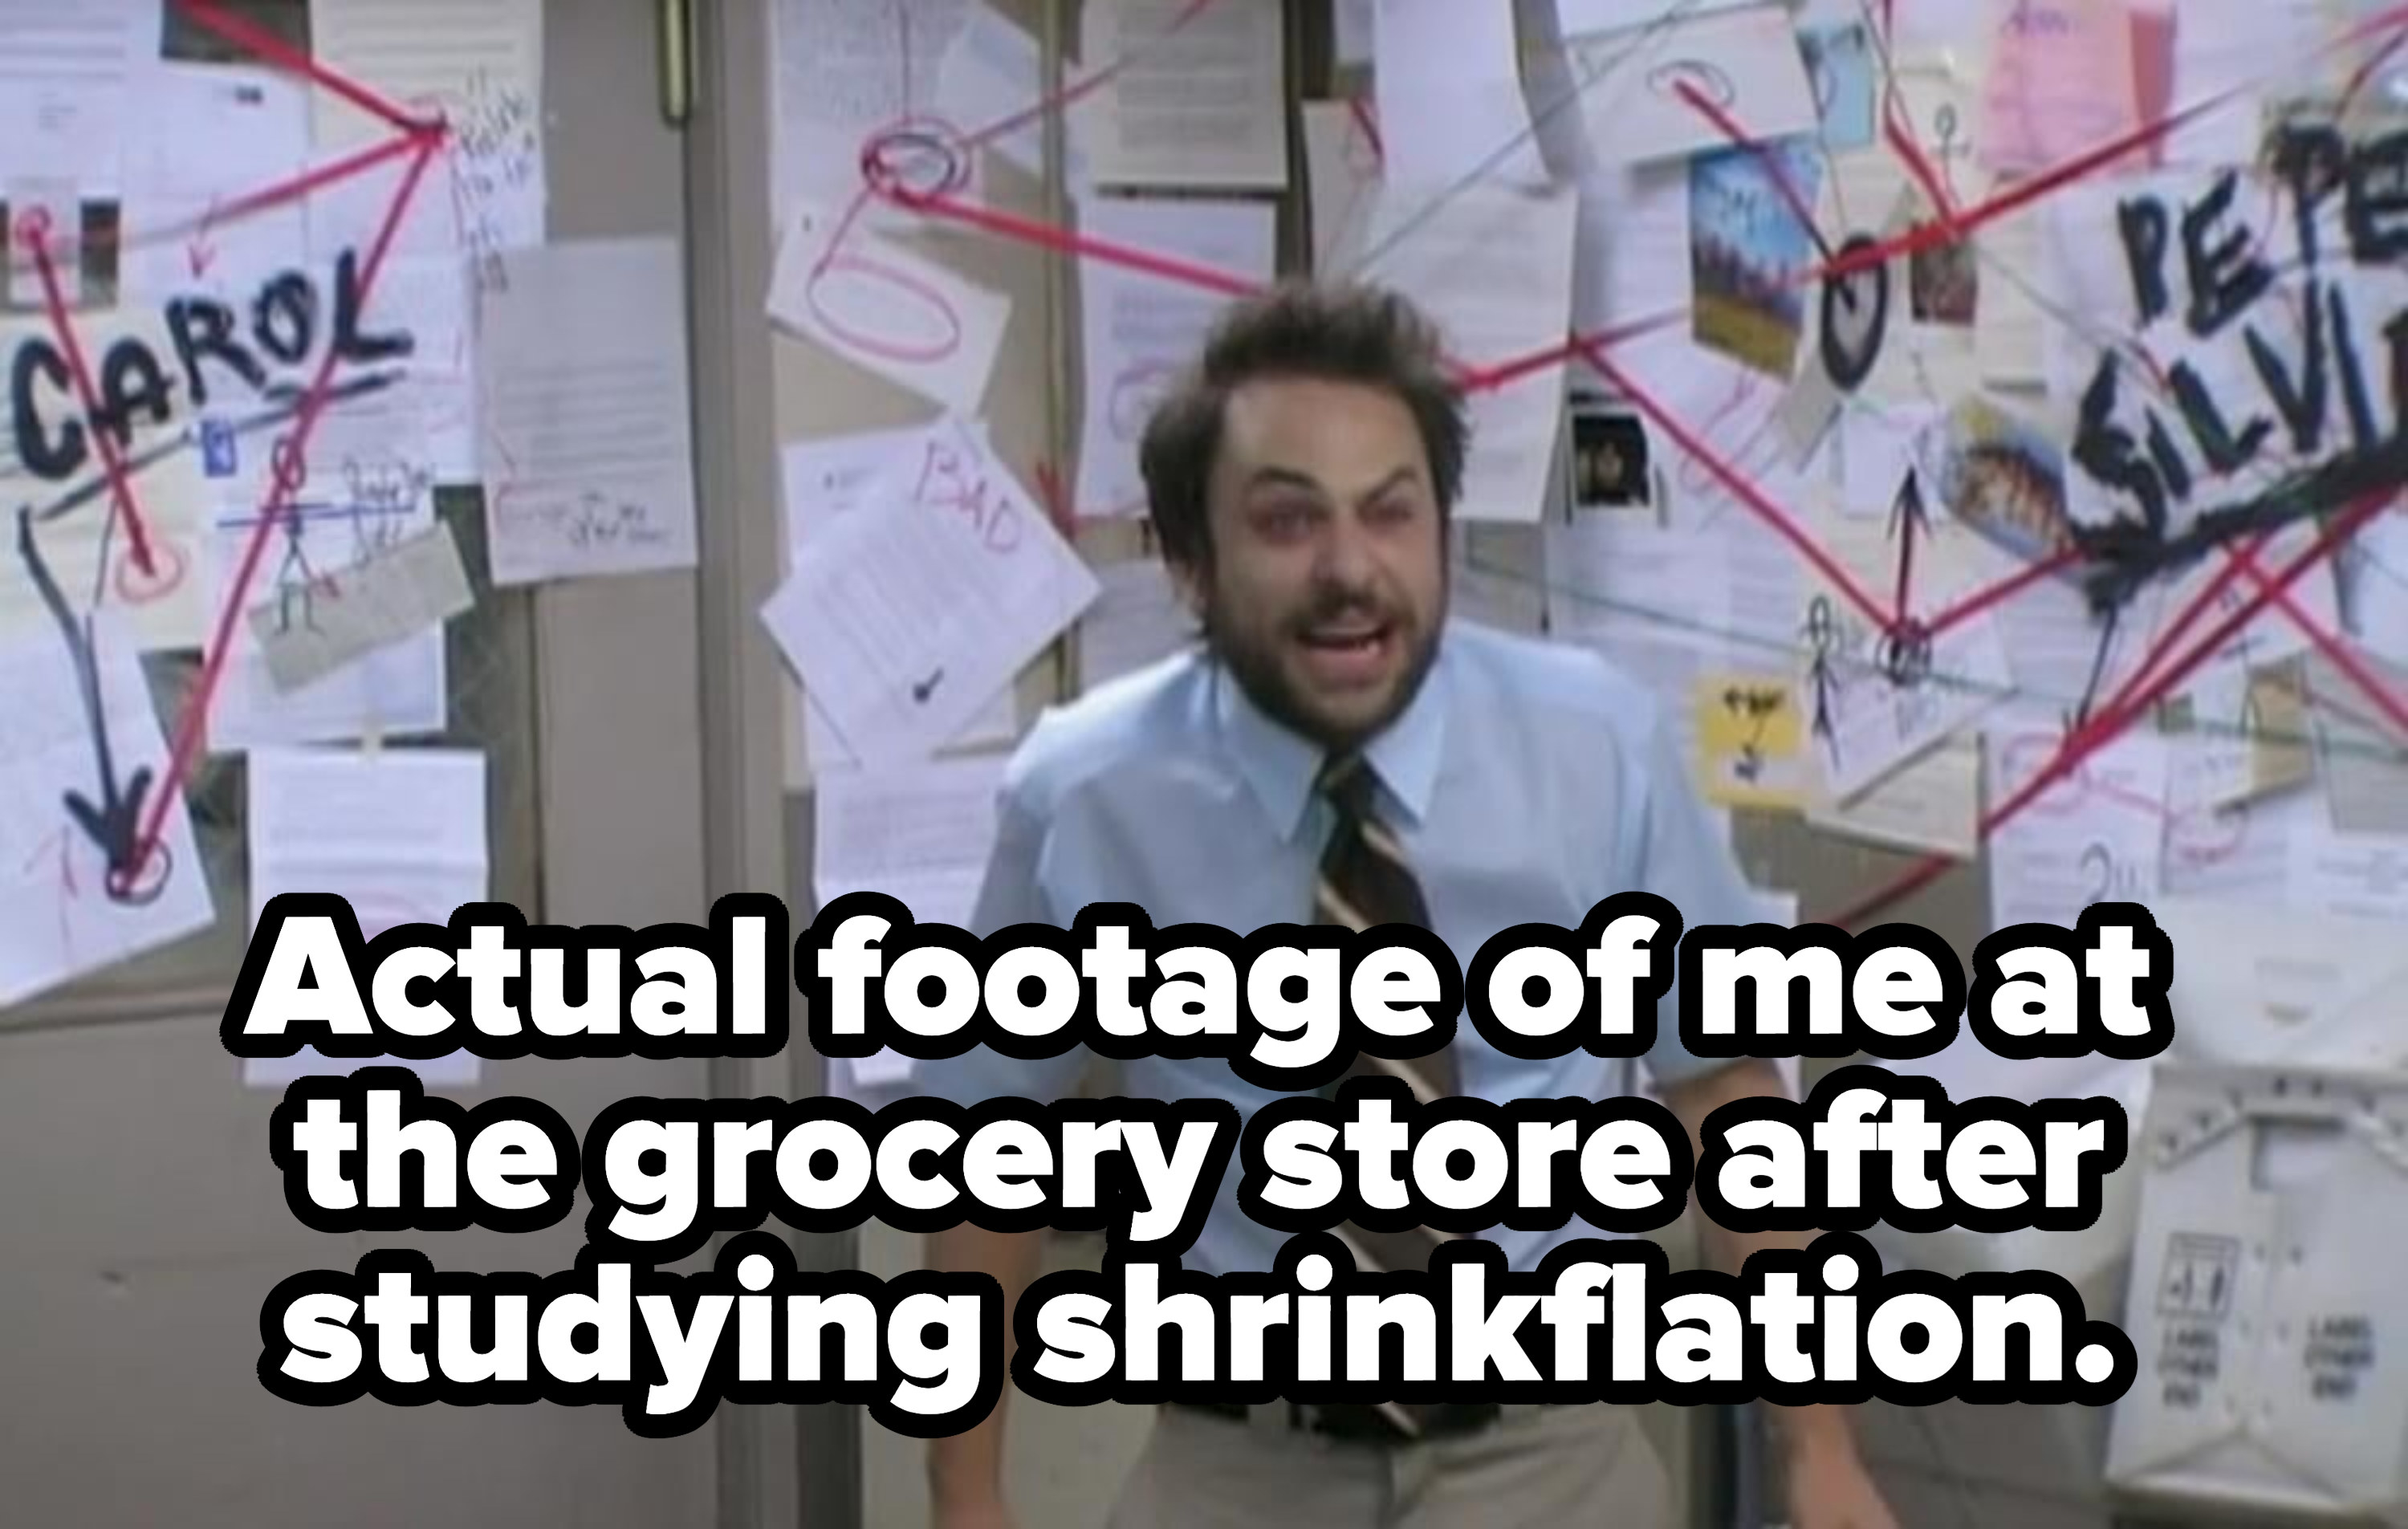 Charlie from &quot;It&#x27;s Always Sunny&quot; ranting in front of a conspiracy board with the caption, &quot;Actual footage of me at the grocery store after studying shrinkflation&quot;